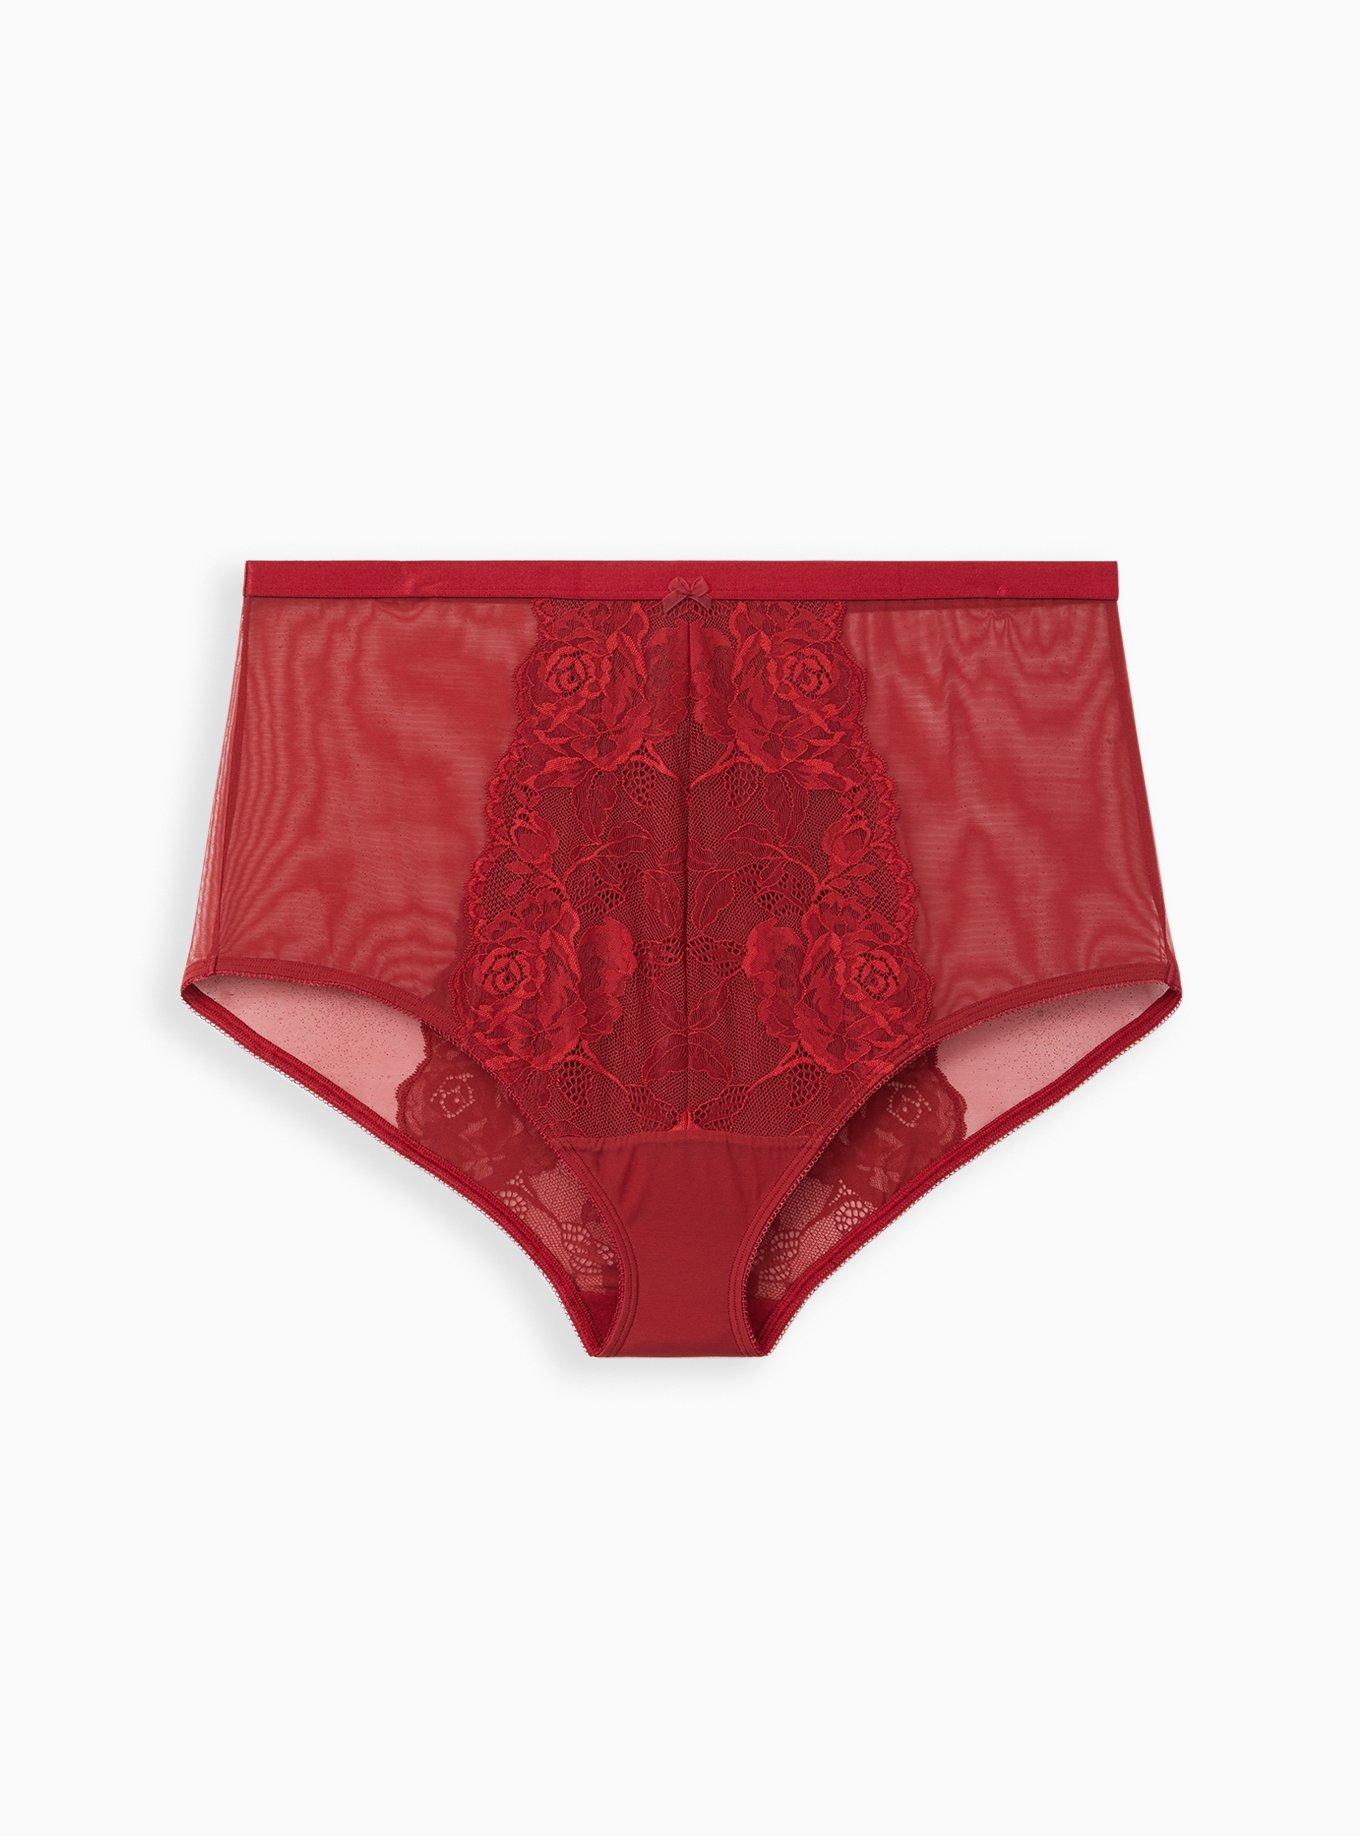 French Knickers Sheer Chiffon Panties Red Sexy Lingerie Underwear See  Through 